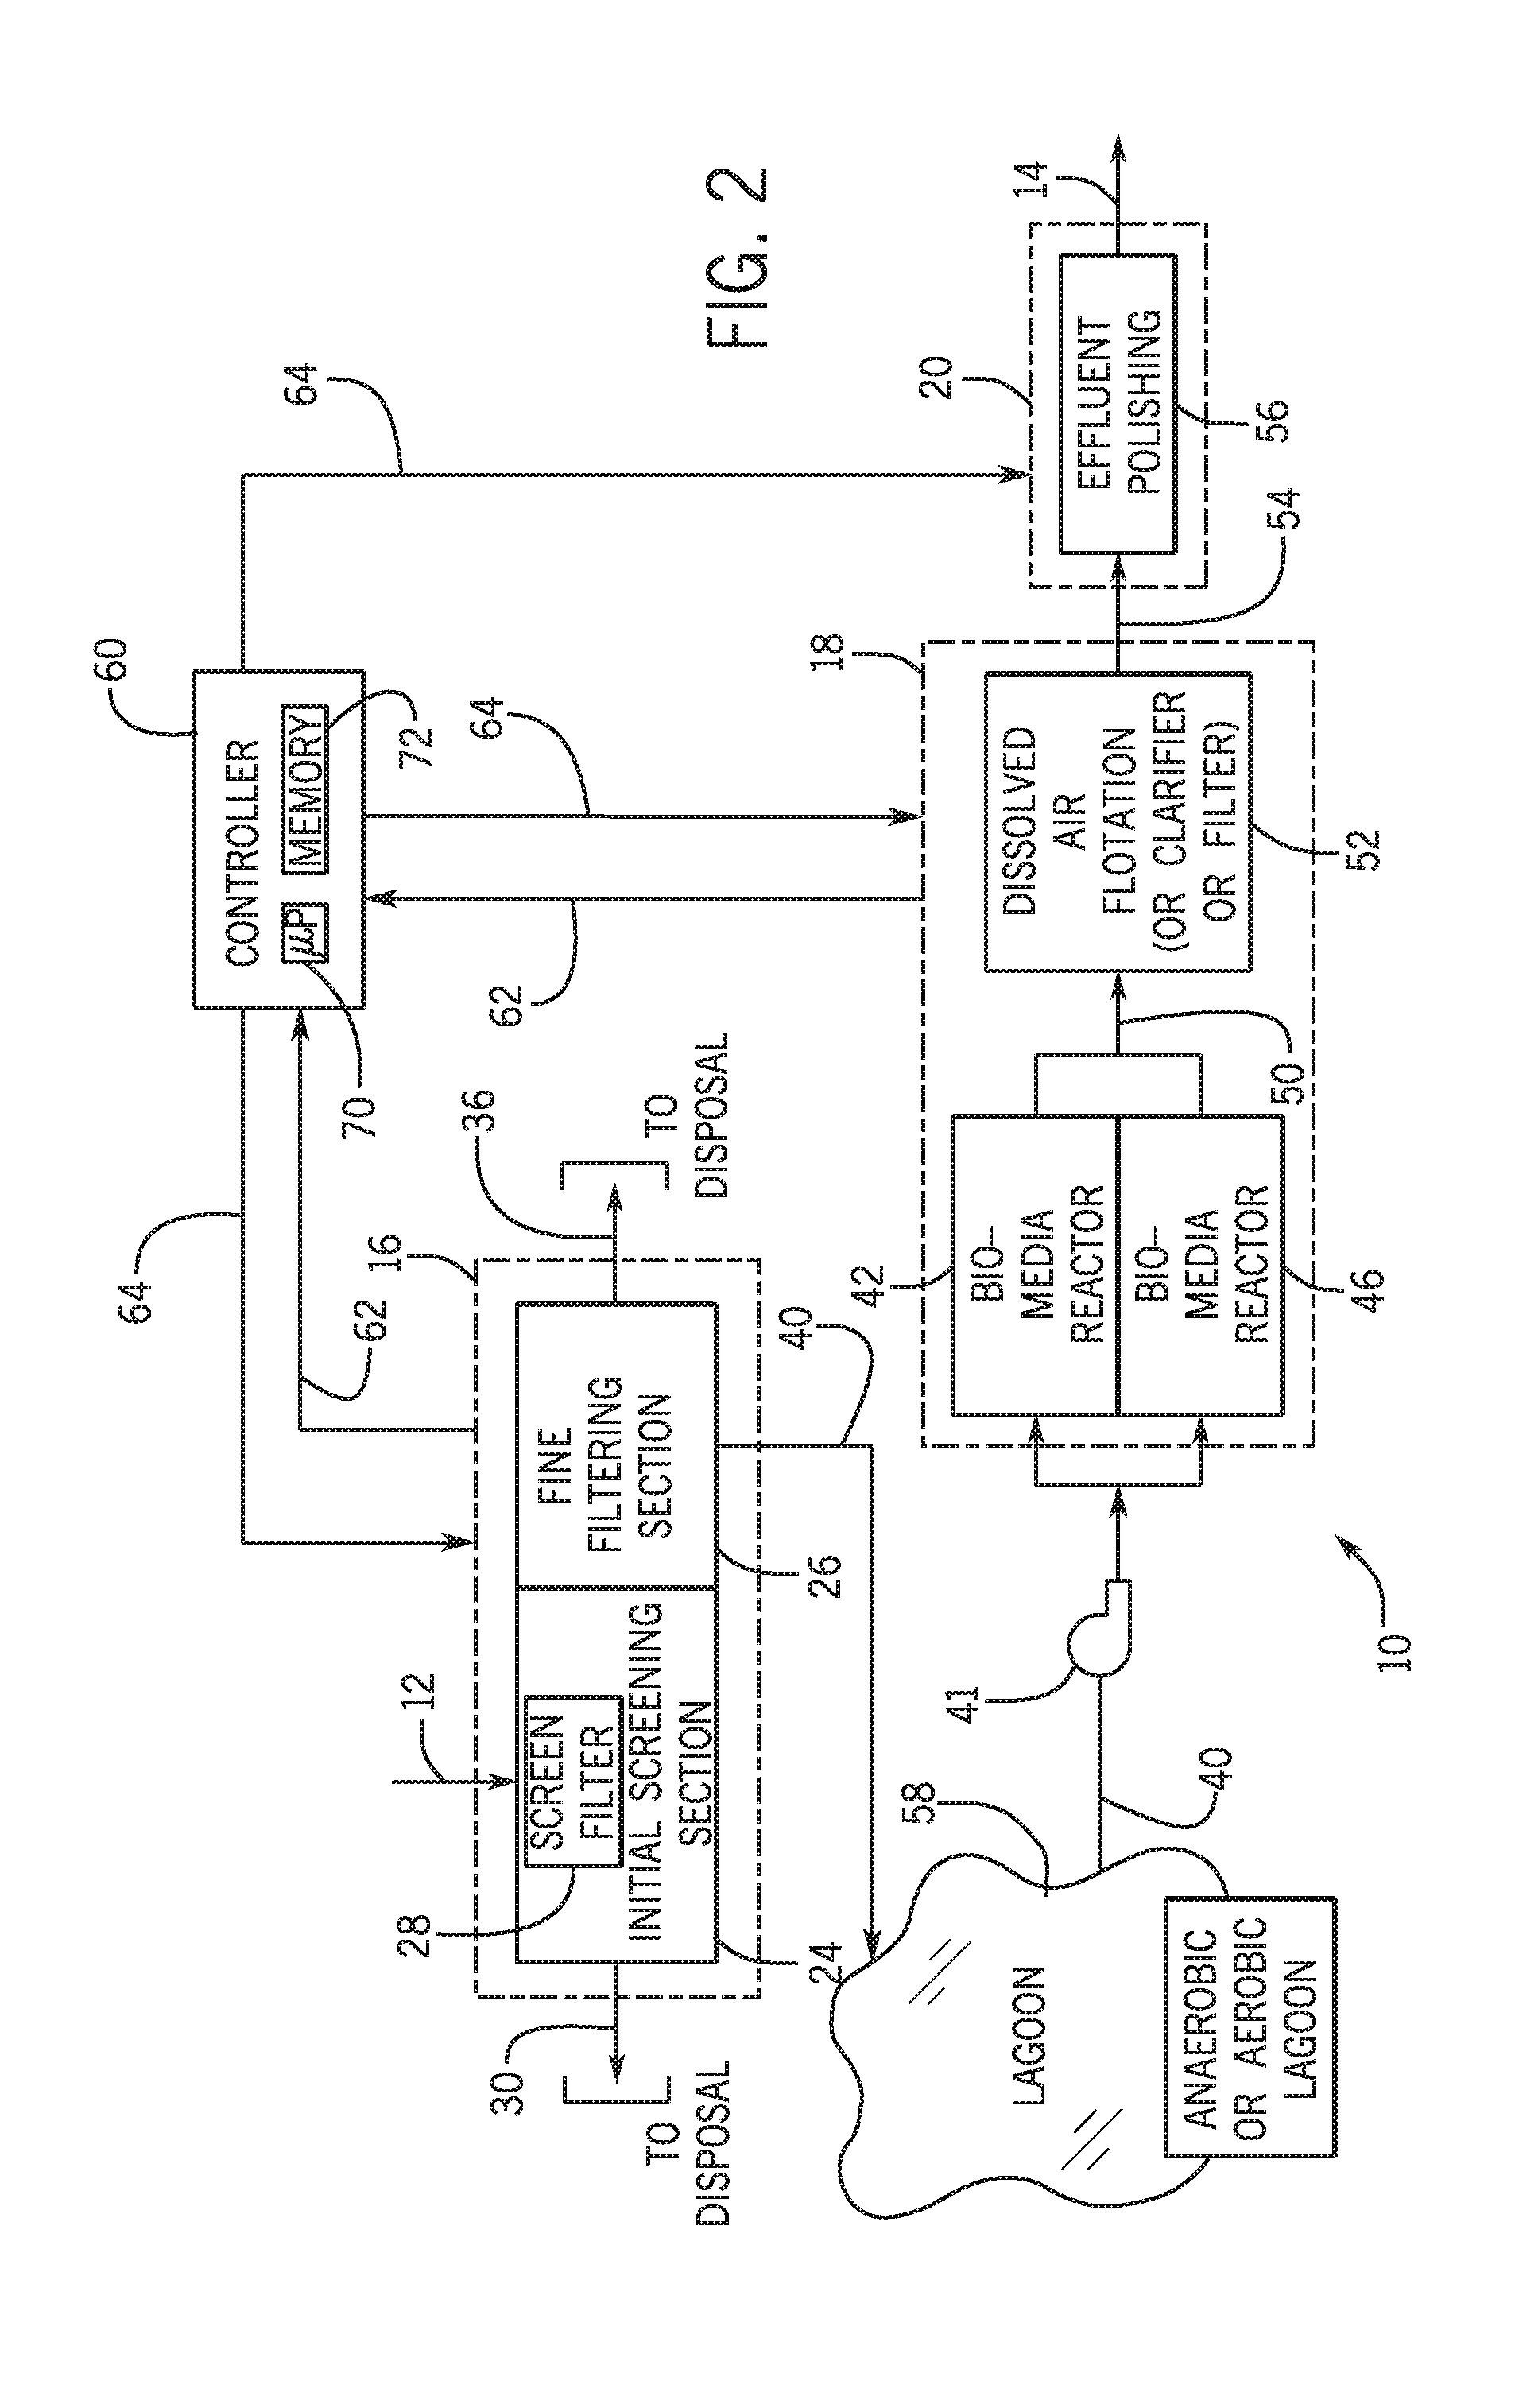 Moving bed biofilm reactor for waste water treatment system